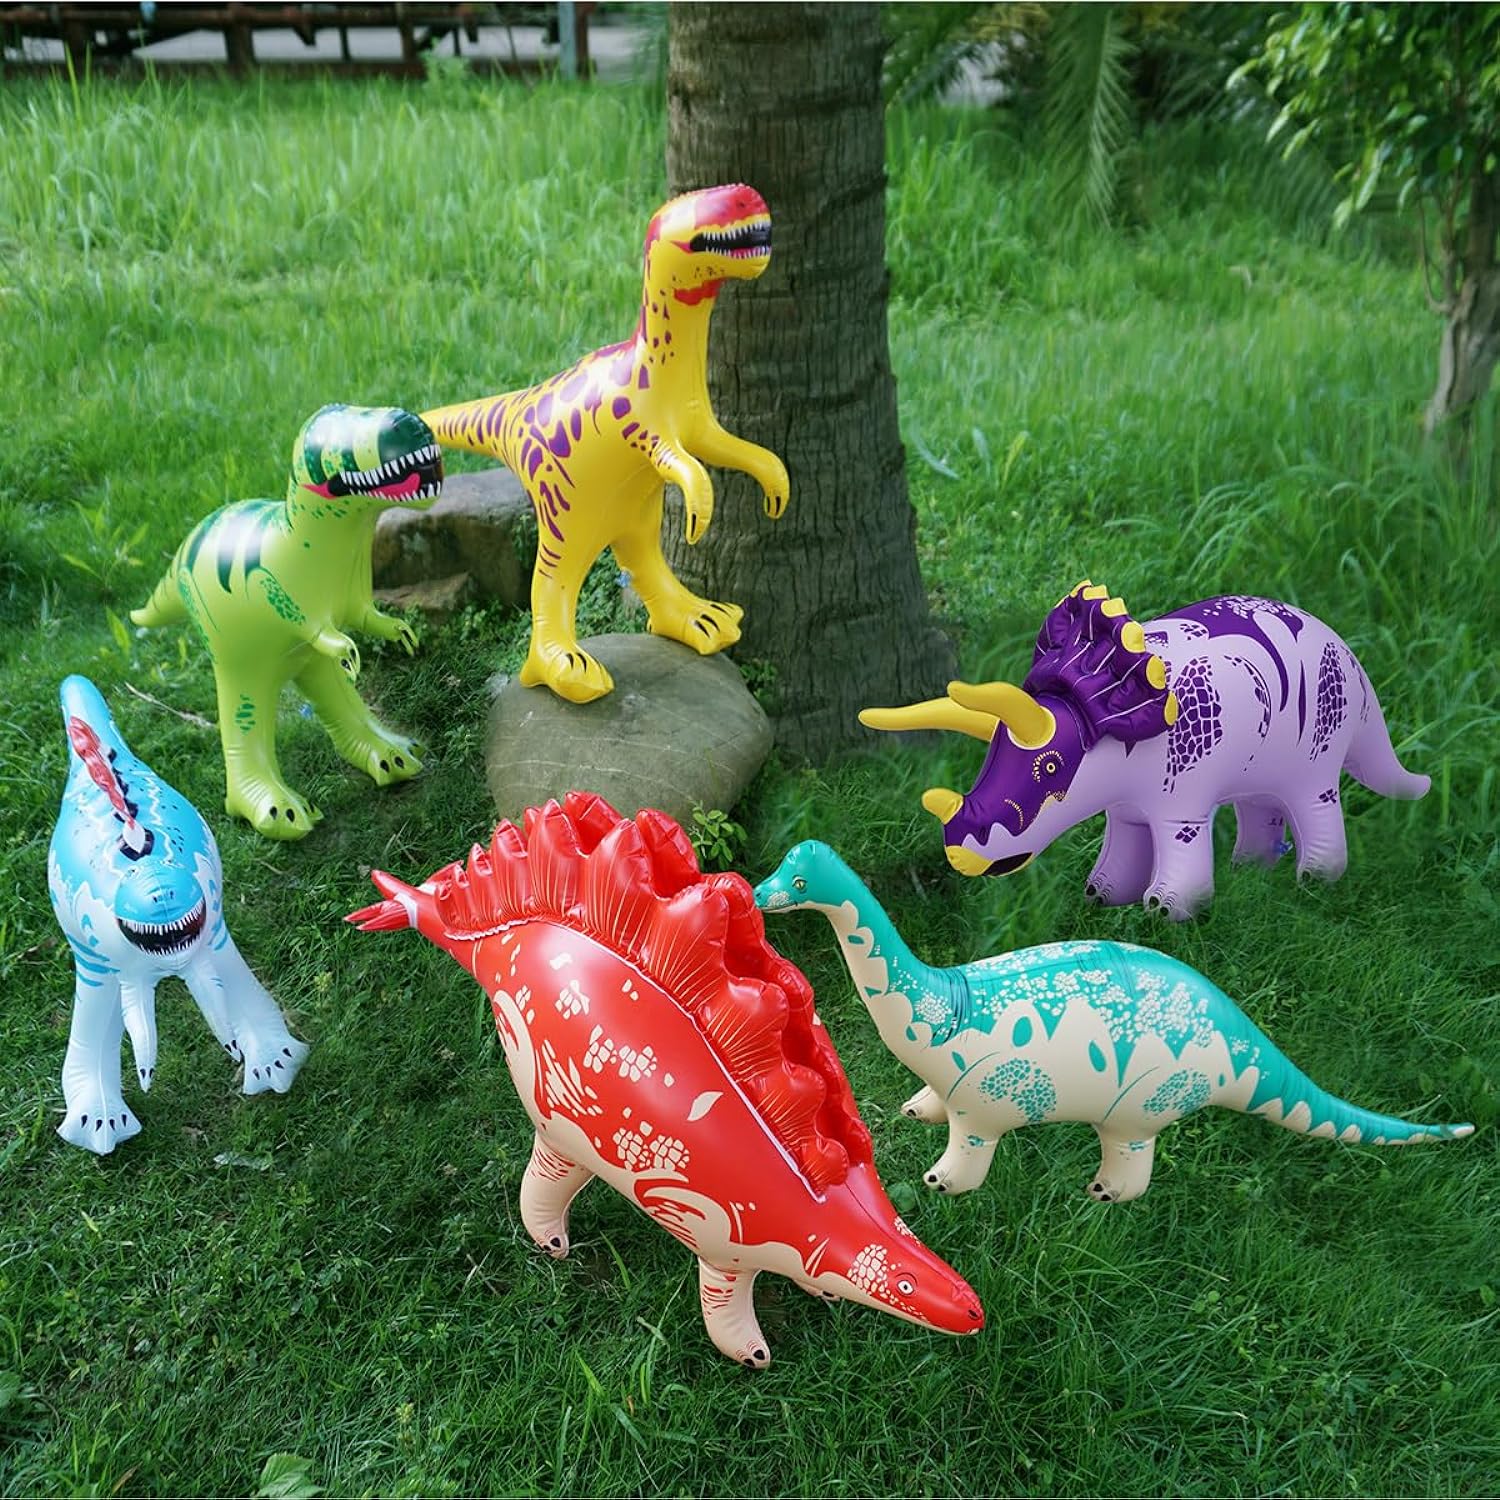 Great Choice Products 6 Pack Dinosaur Party Decorations Include Air Pump Dinosaur Pool Float Toy Dinosaur Birthday Party Supplies Dinosaur Toys